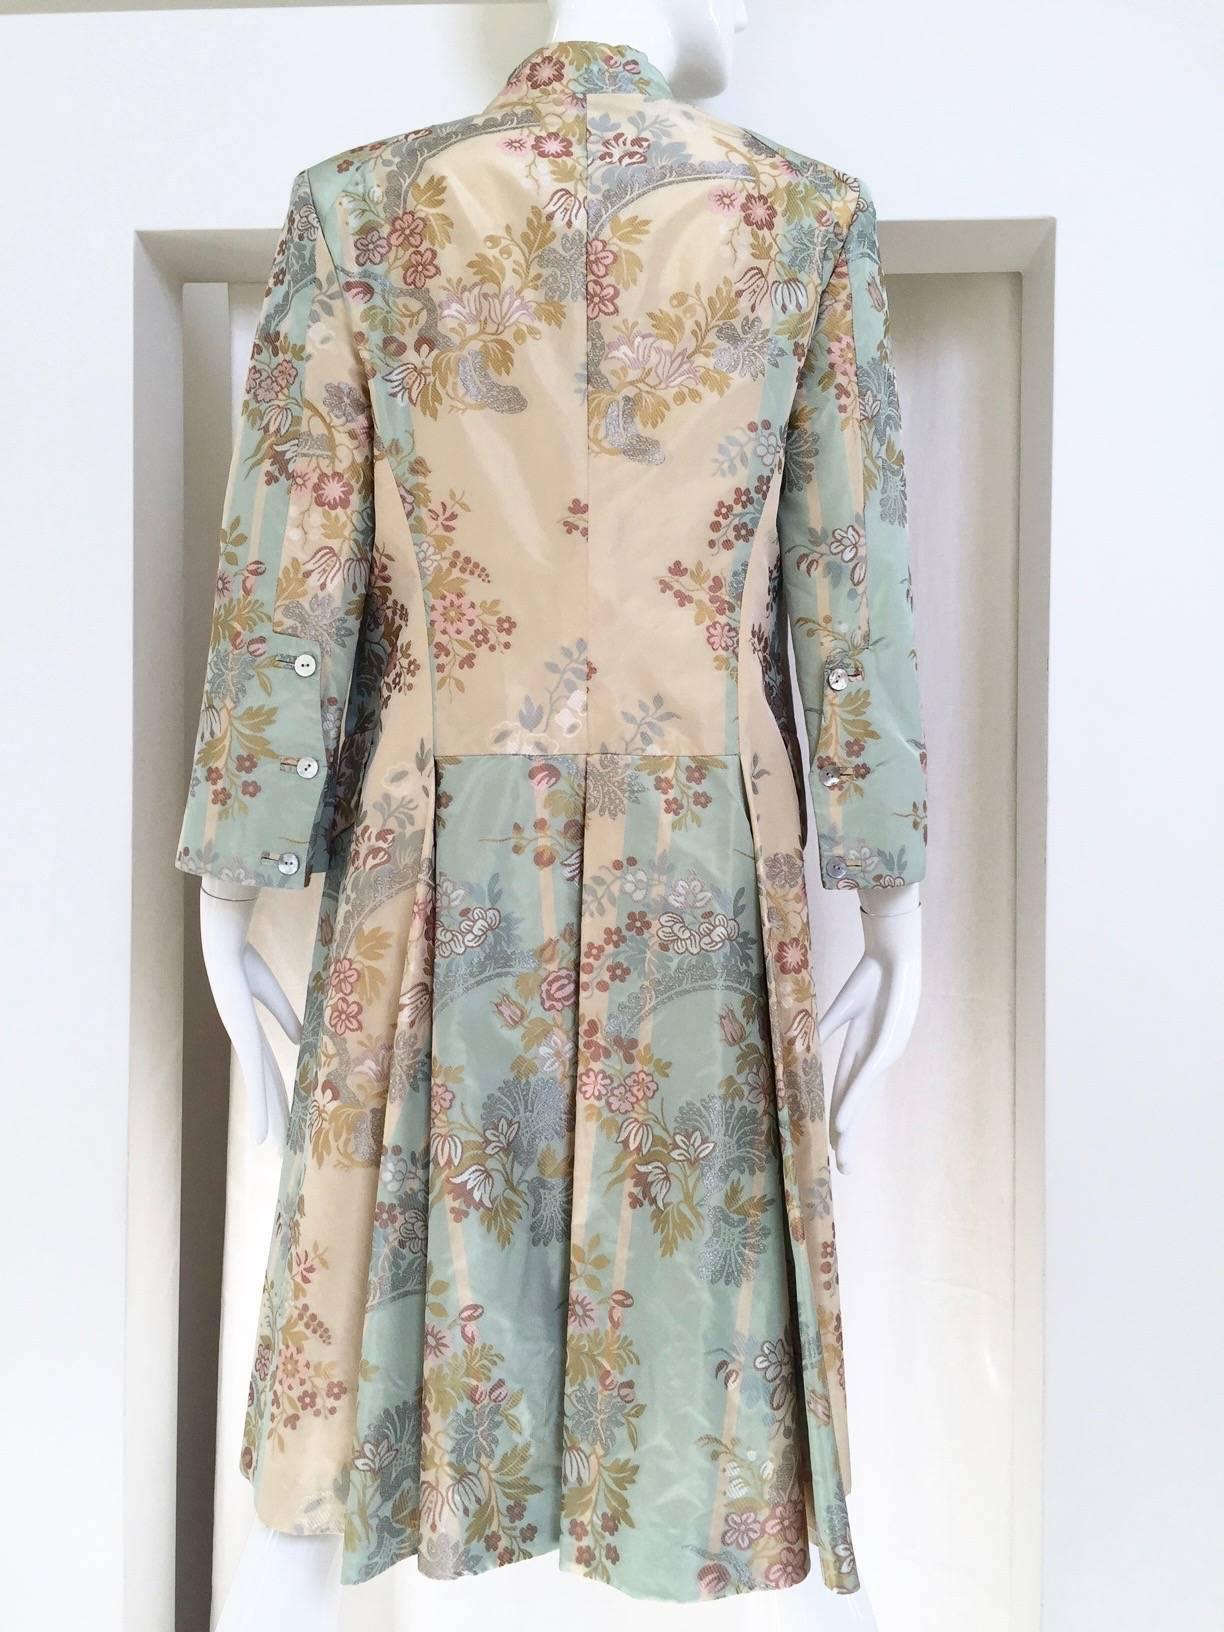 Beautiful !
Pale minty green, gold, silver and floral print luxurious silk brocade  coat by Alexander McQueen. 
Bust: 36”/ Shoulder: 15.5”
Length: 39”/ Sleeve: 19.5”
marked size:  40

